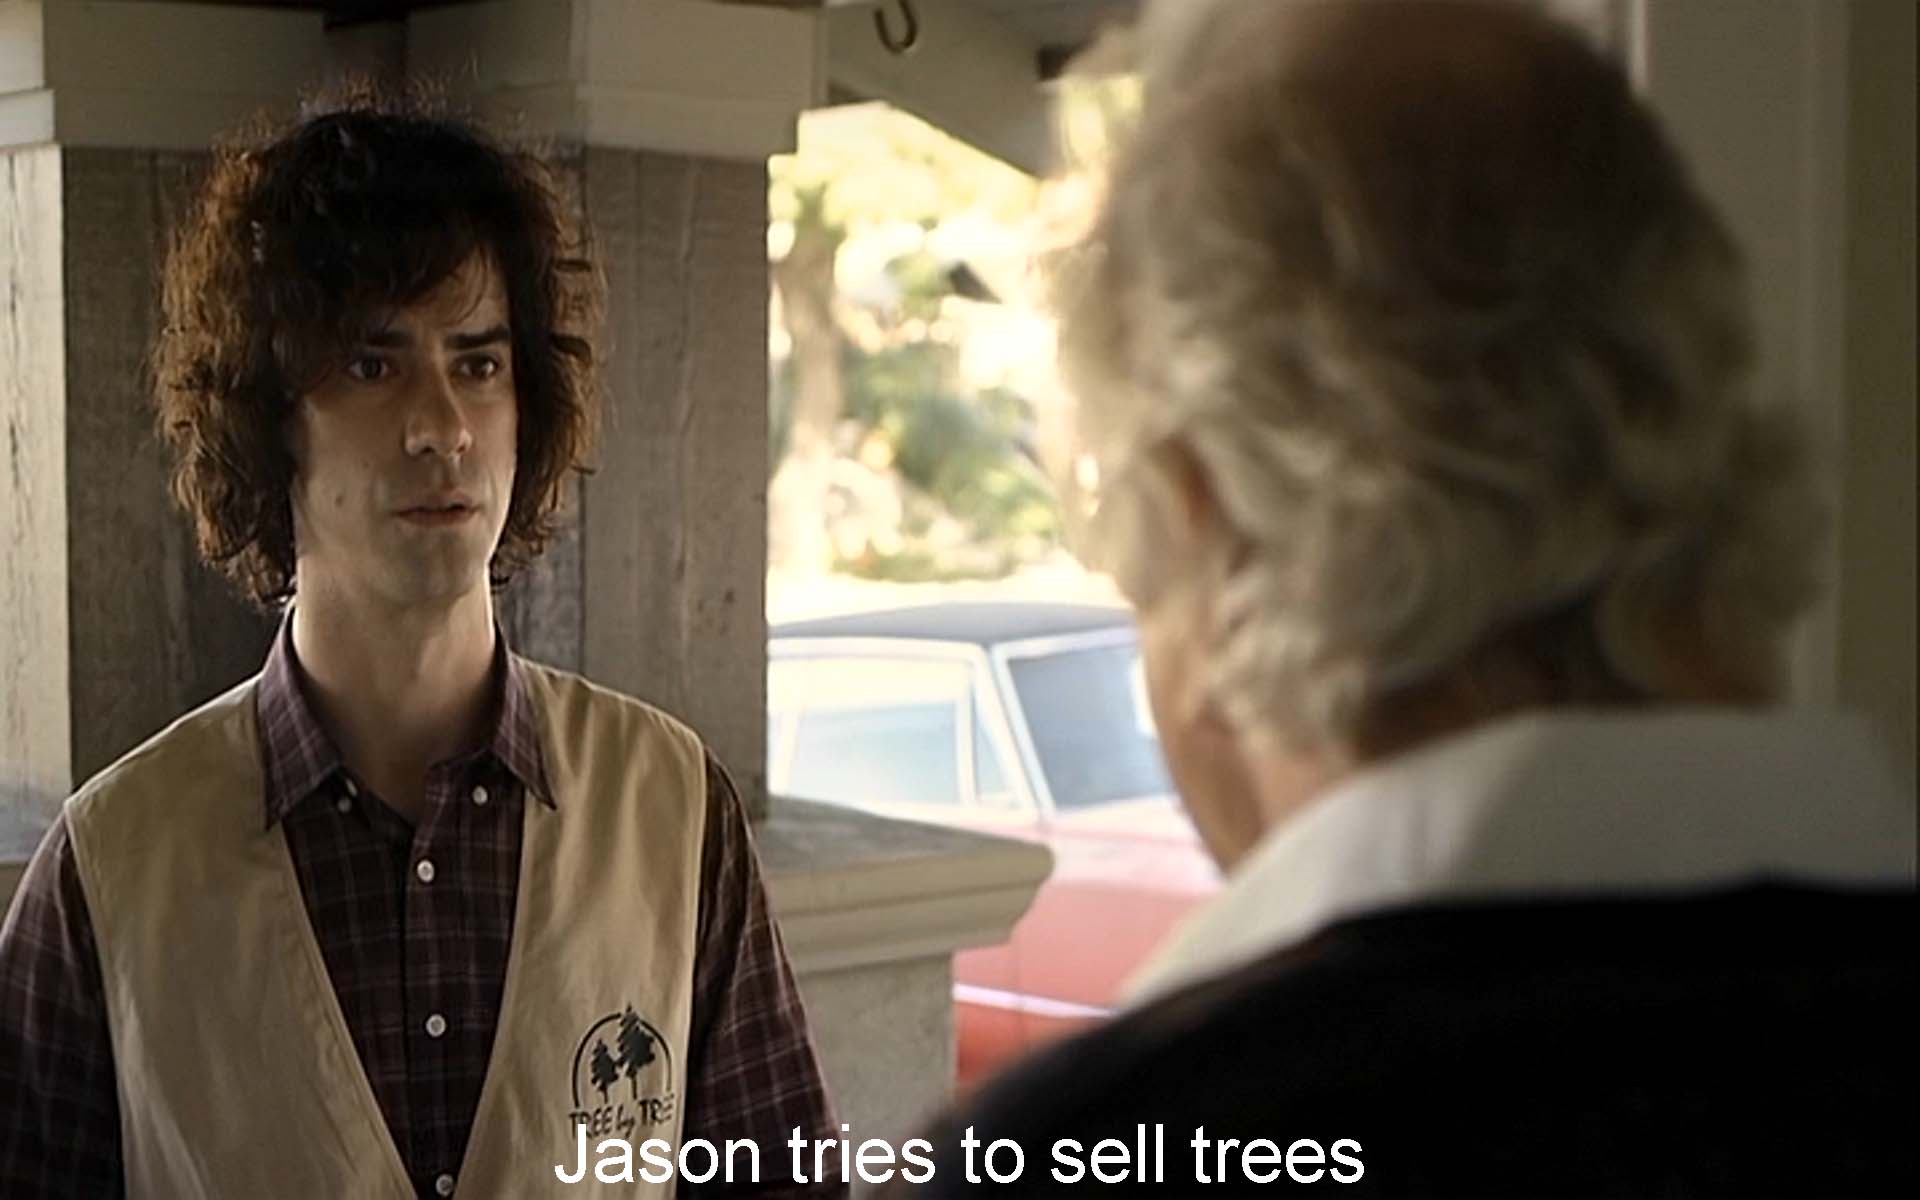 Jason tries to sell trees